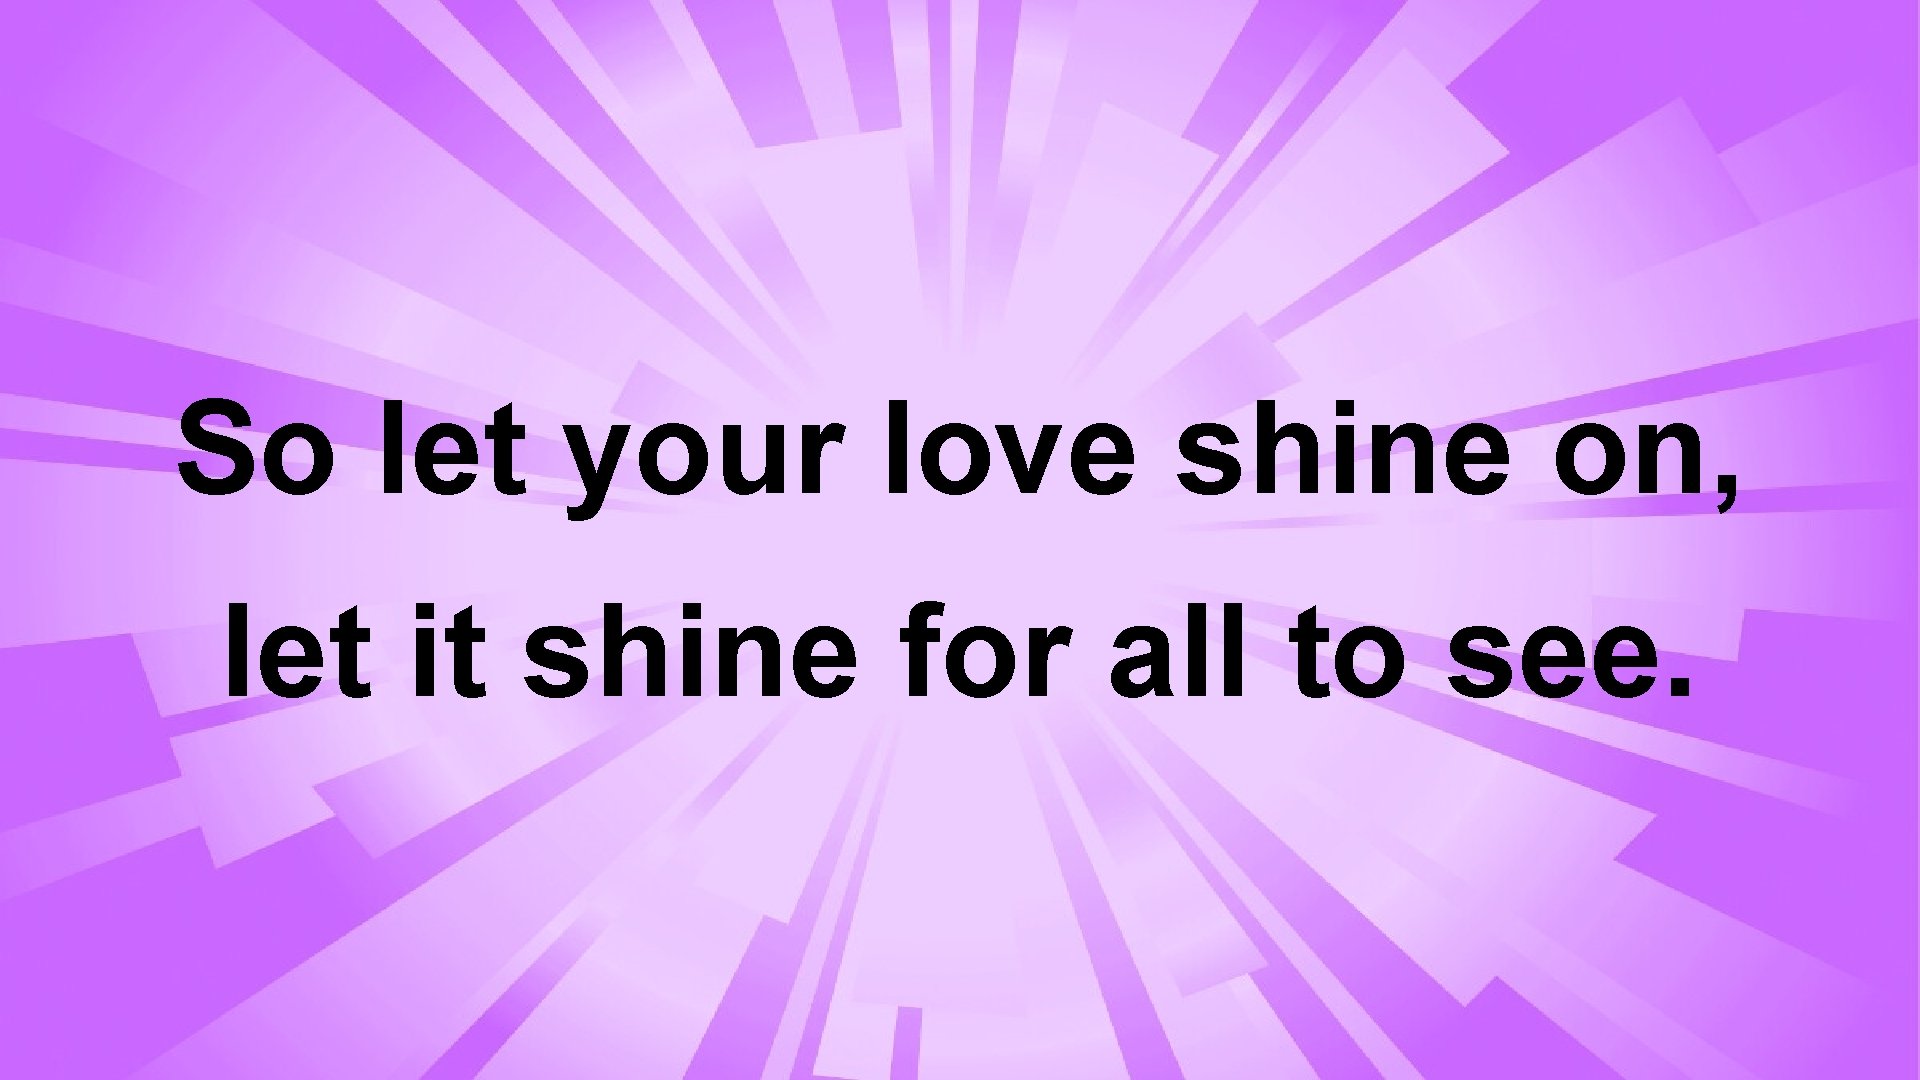 So let your love shine on, let it shine for all to see. 